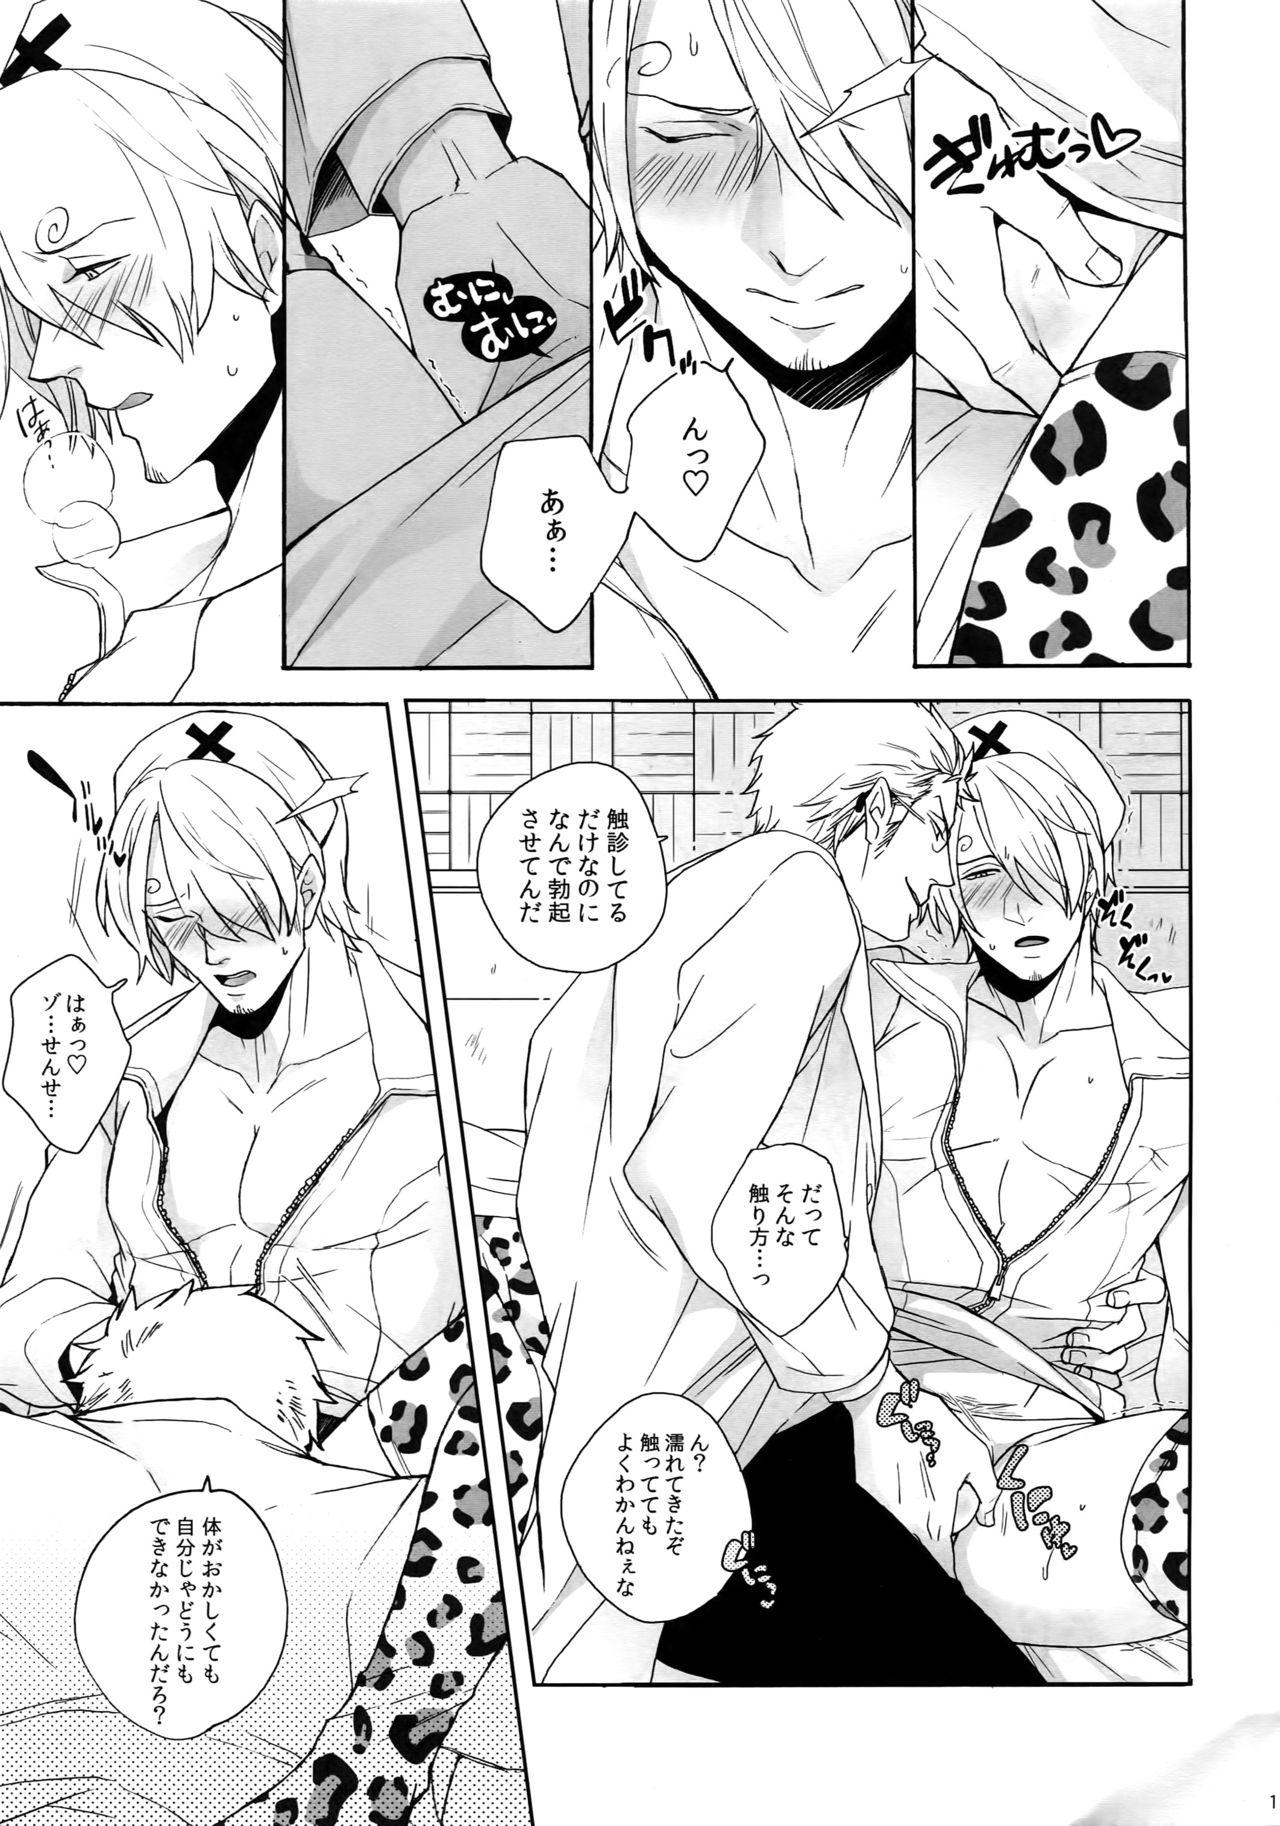 Jav Outflank the Mirror Ball. - One piece Scissoring - Page 12